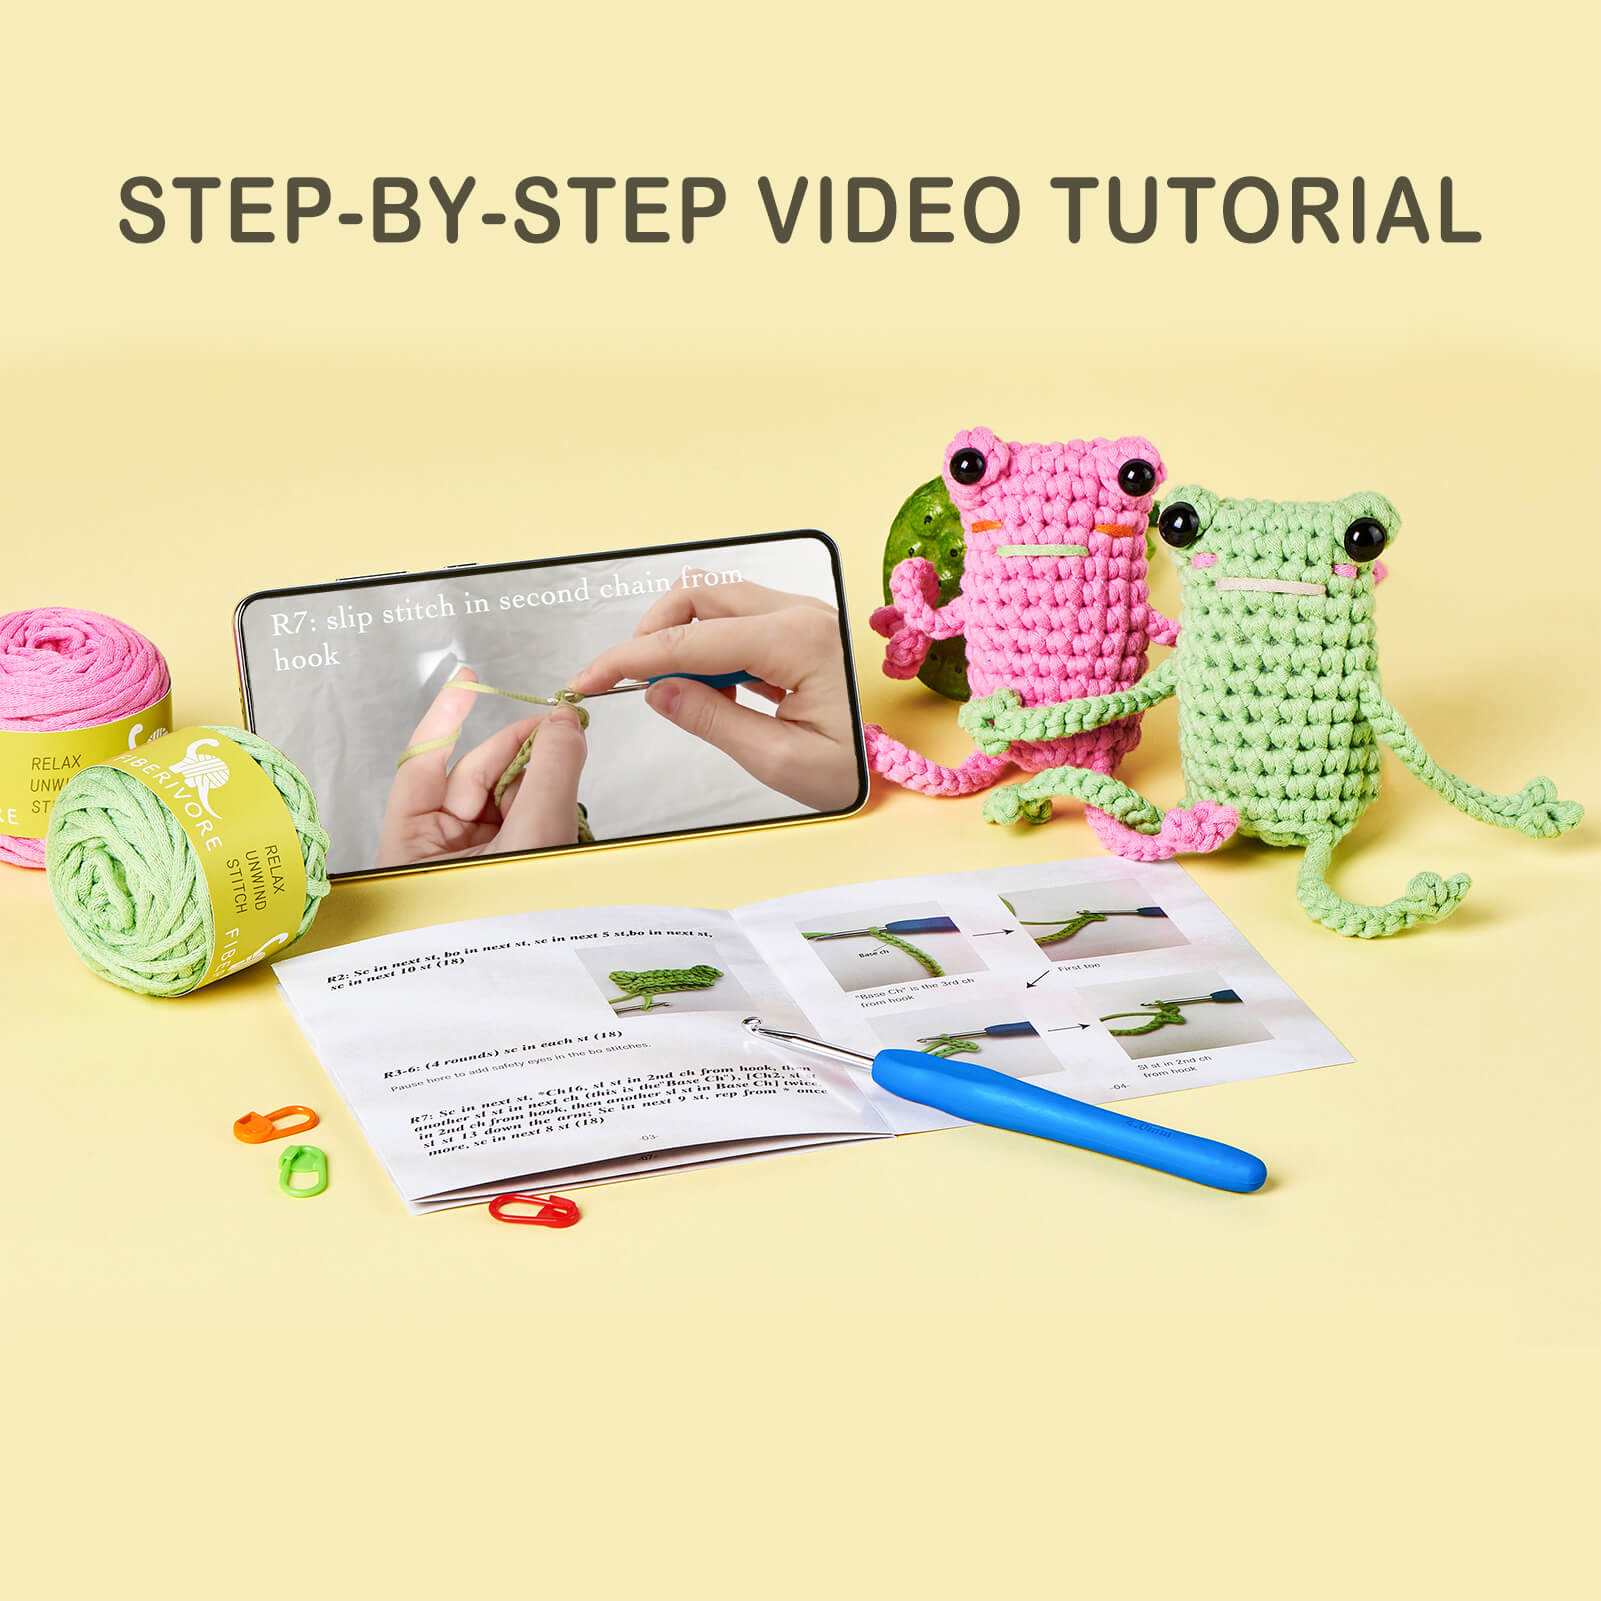 Crochet Kit for Beginners Adults and Kids - Make Amigurumi and Crochet